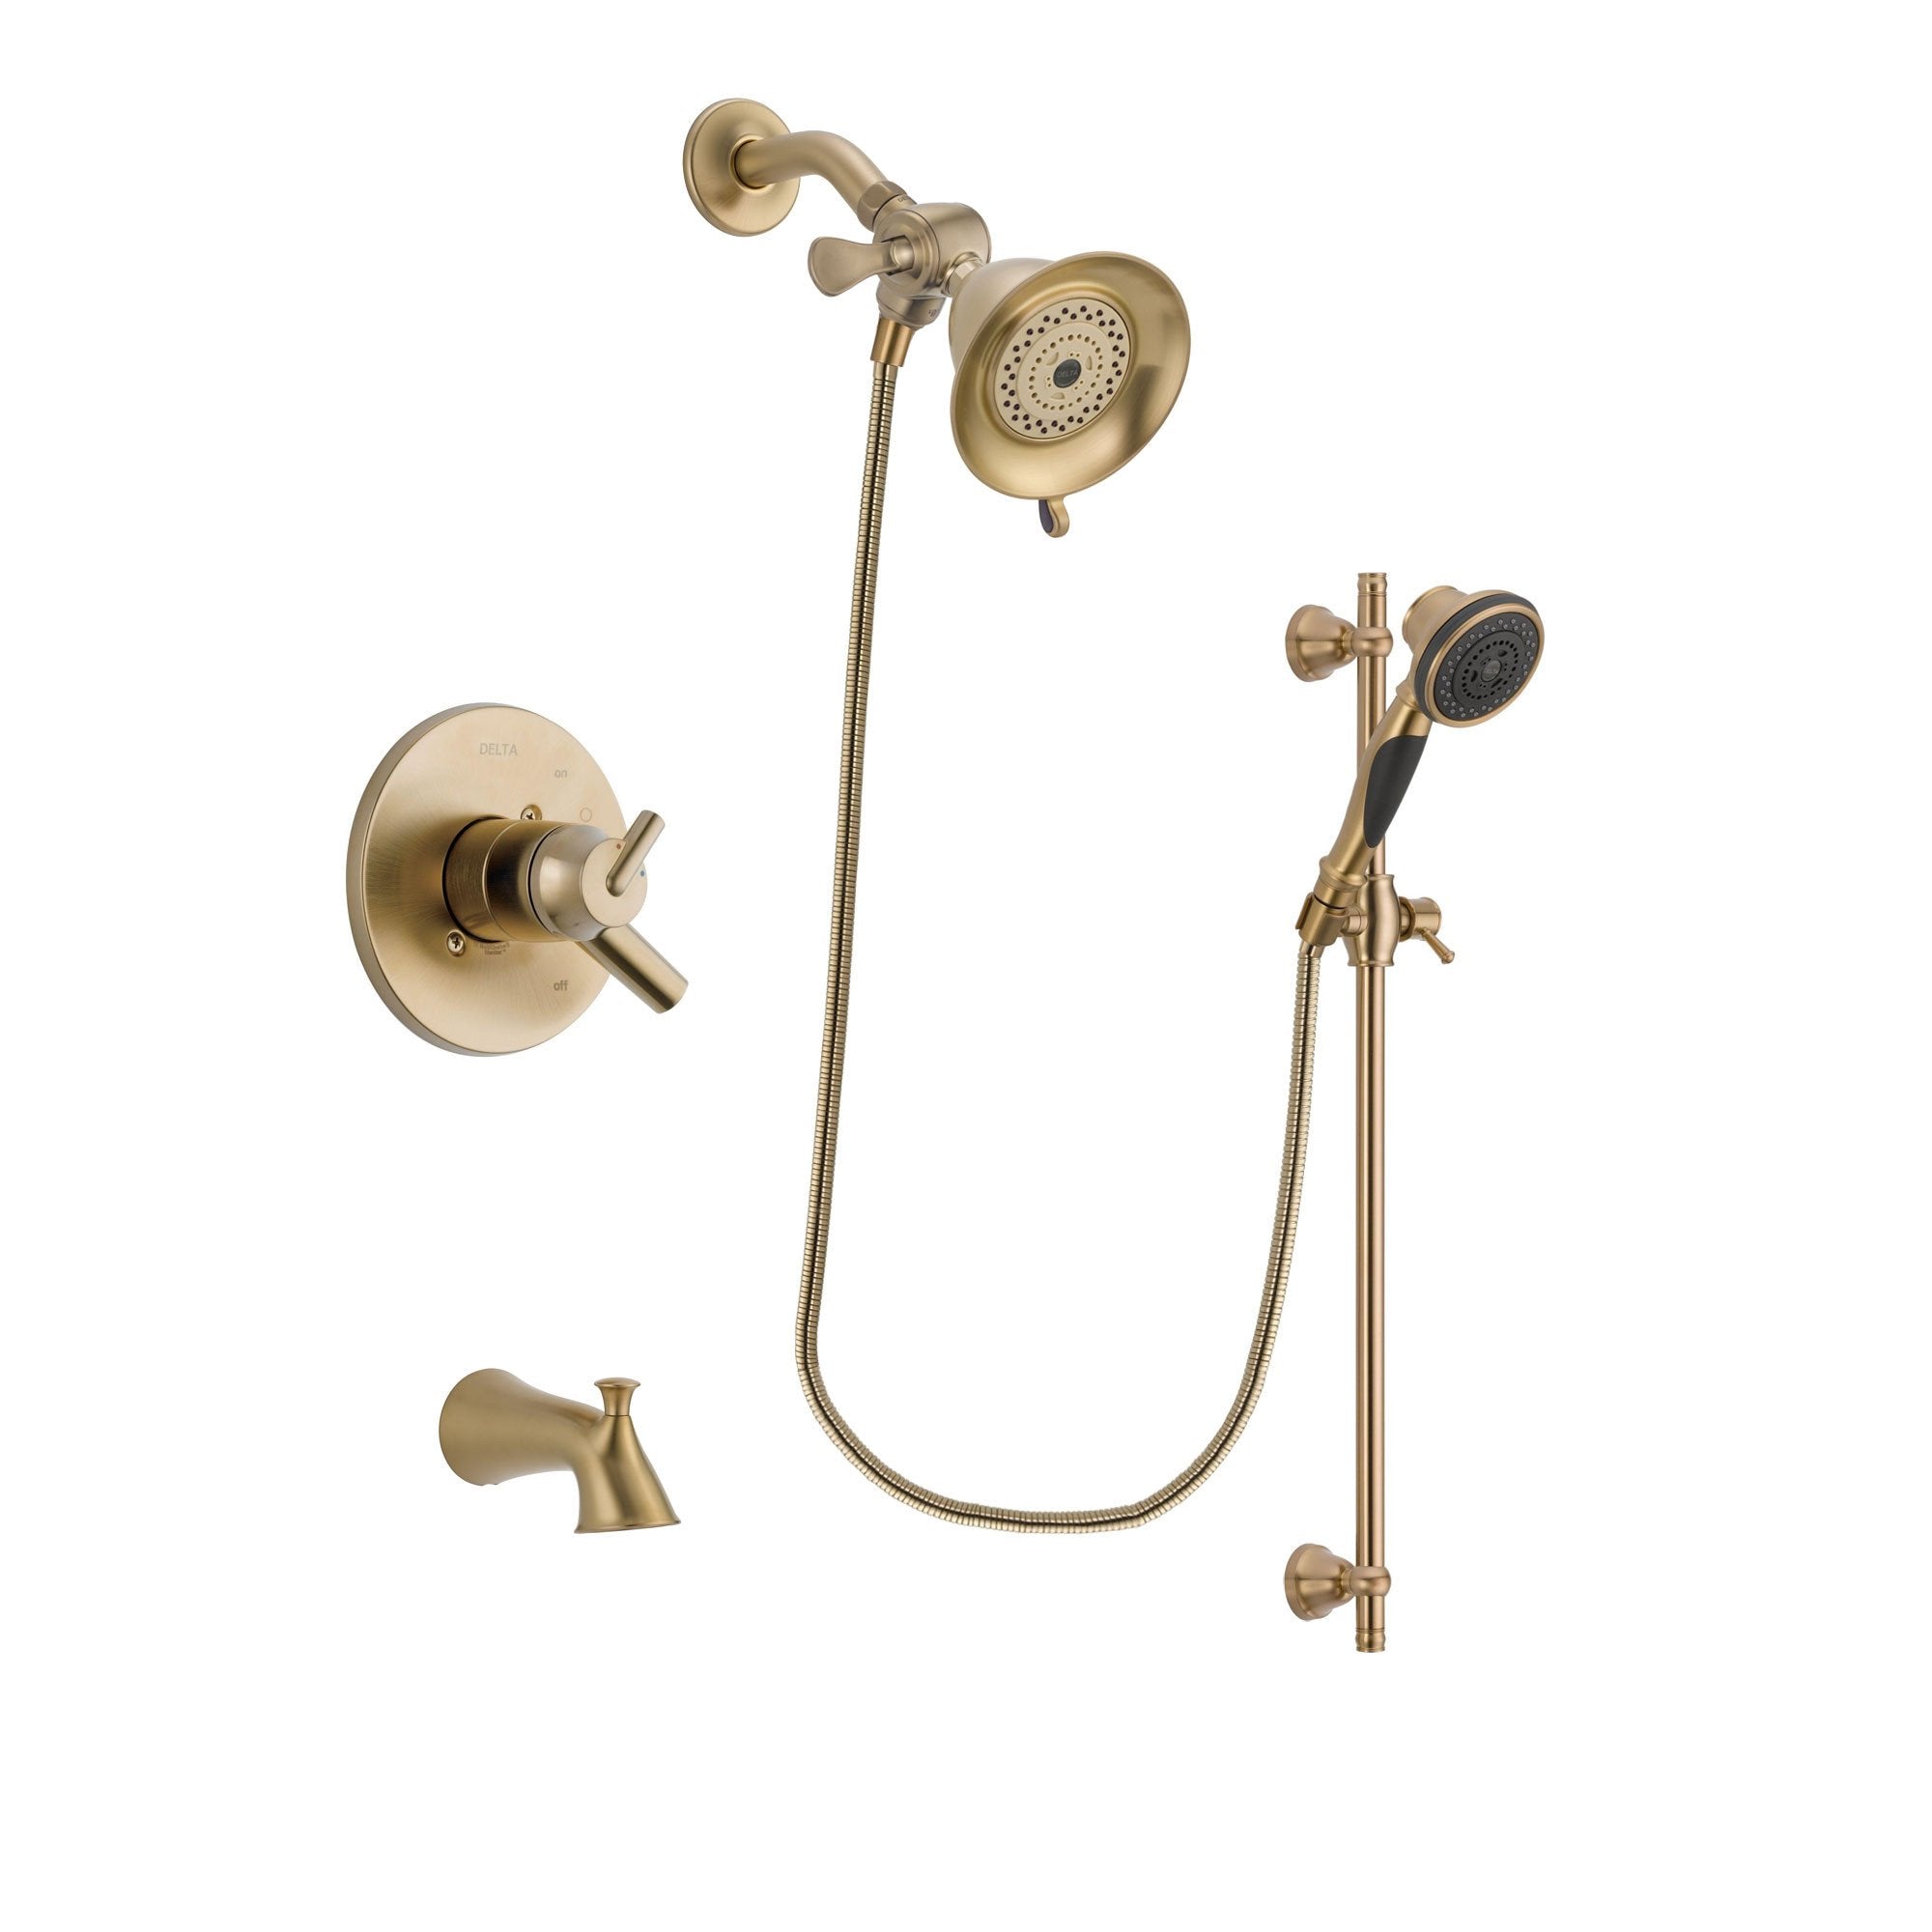 Delta Trinsic Champagne Bronze Finish Dual Control Tub and Shower Faucet System Package with Water-Efficient Shower Head and Personal Handheld Shower Spray with Slide Bar Includes Rough-in Valve and Tub Spout DSP3543V